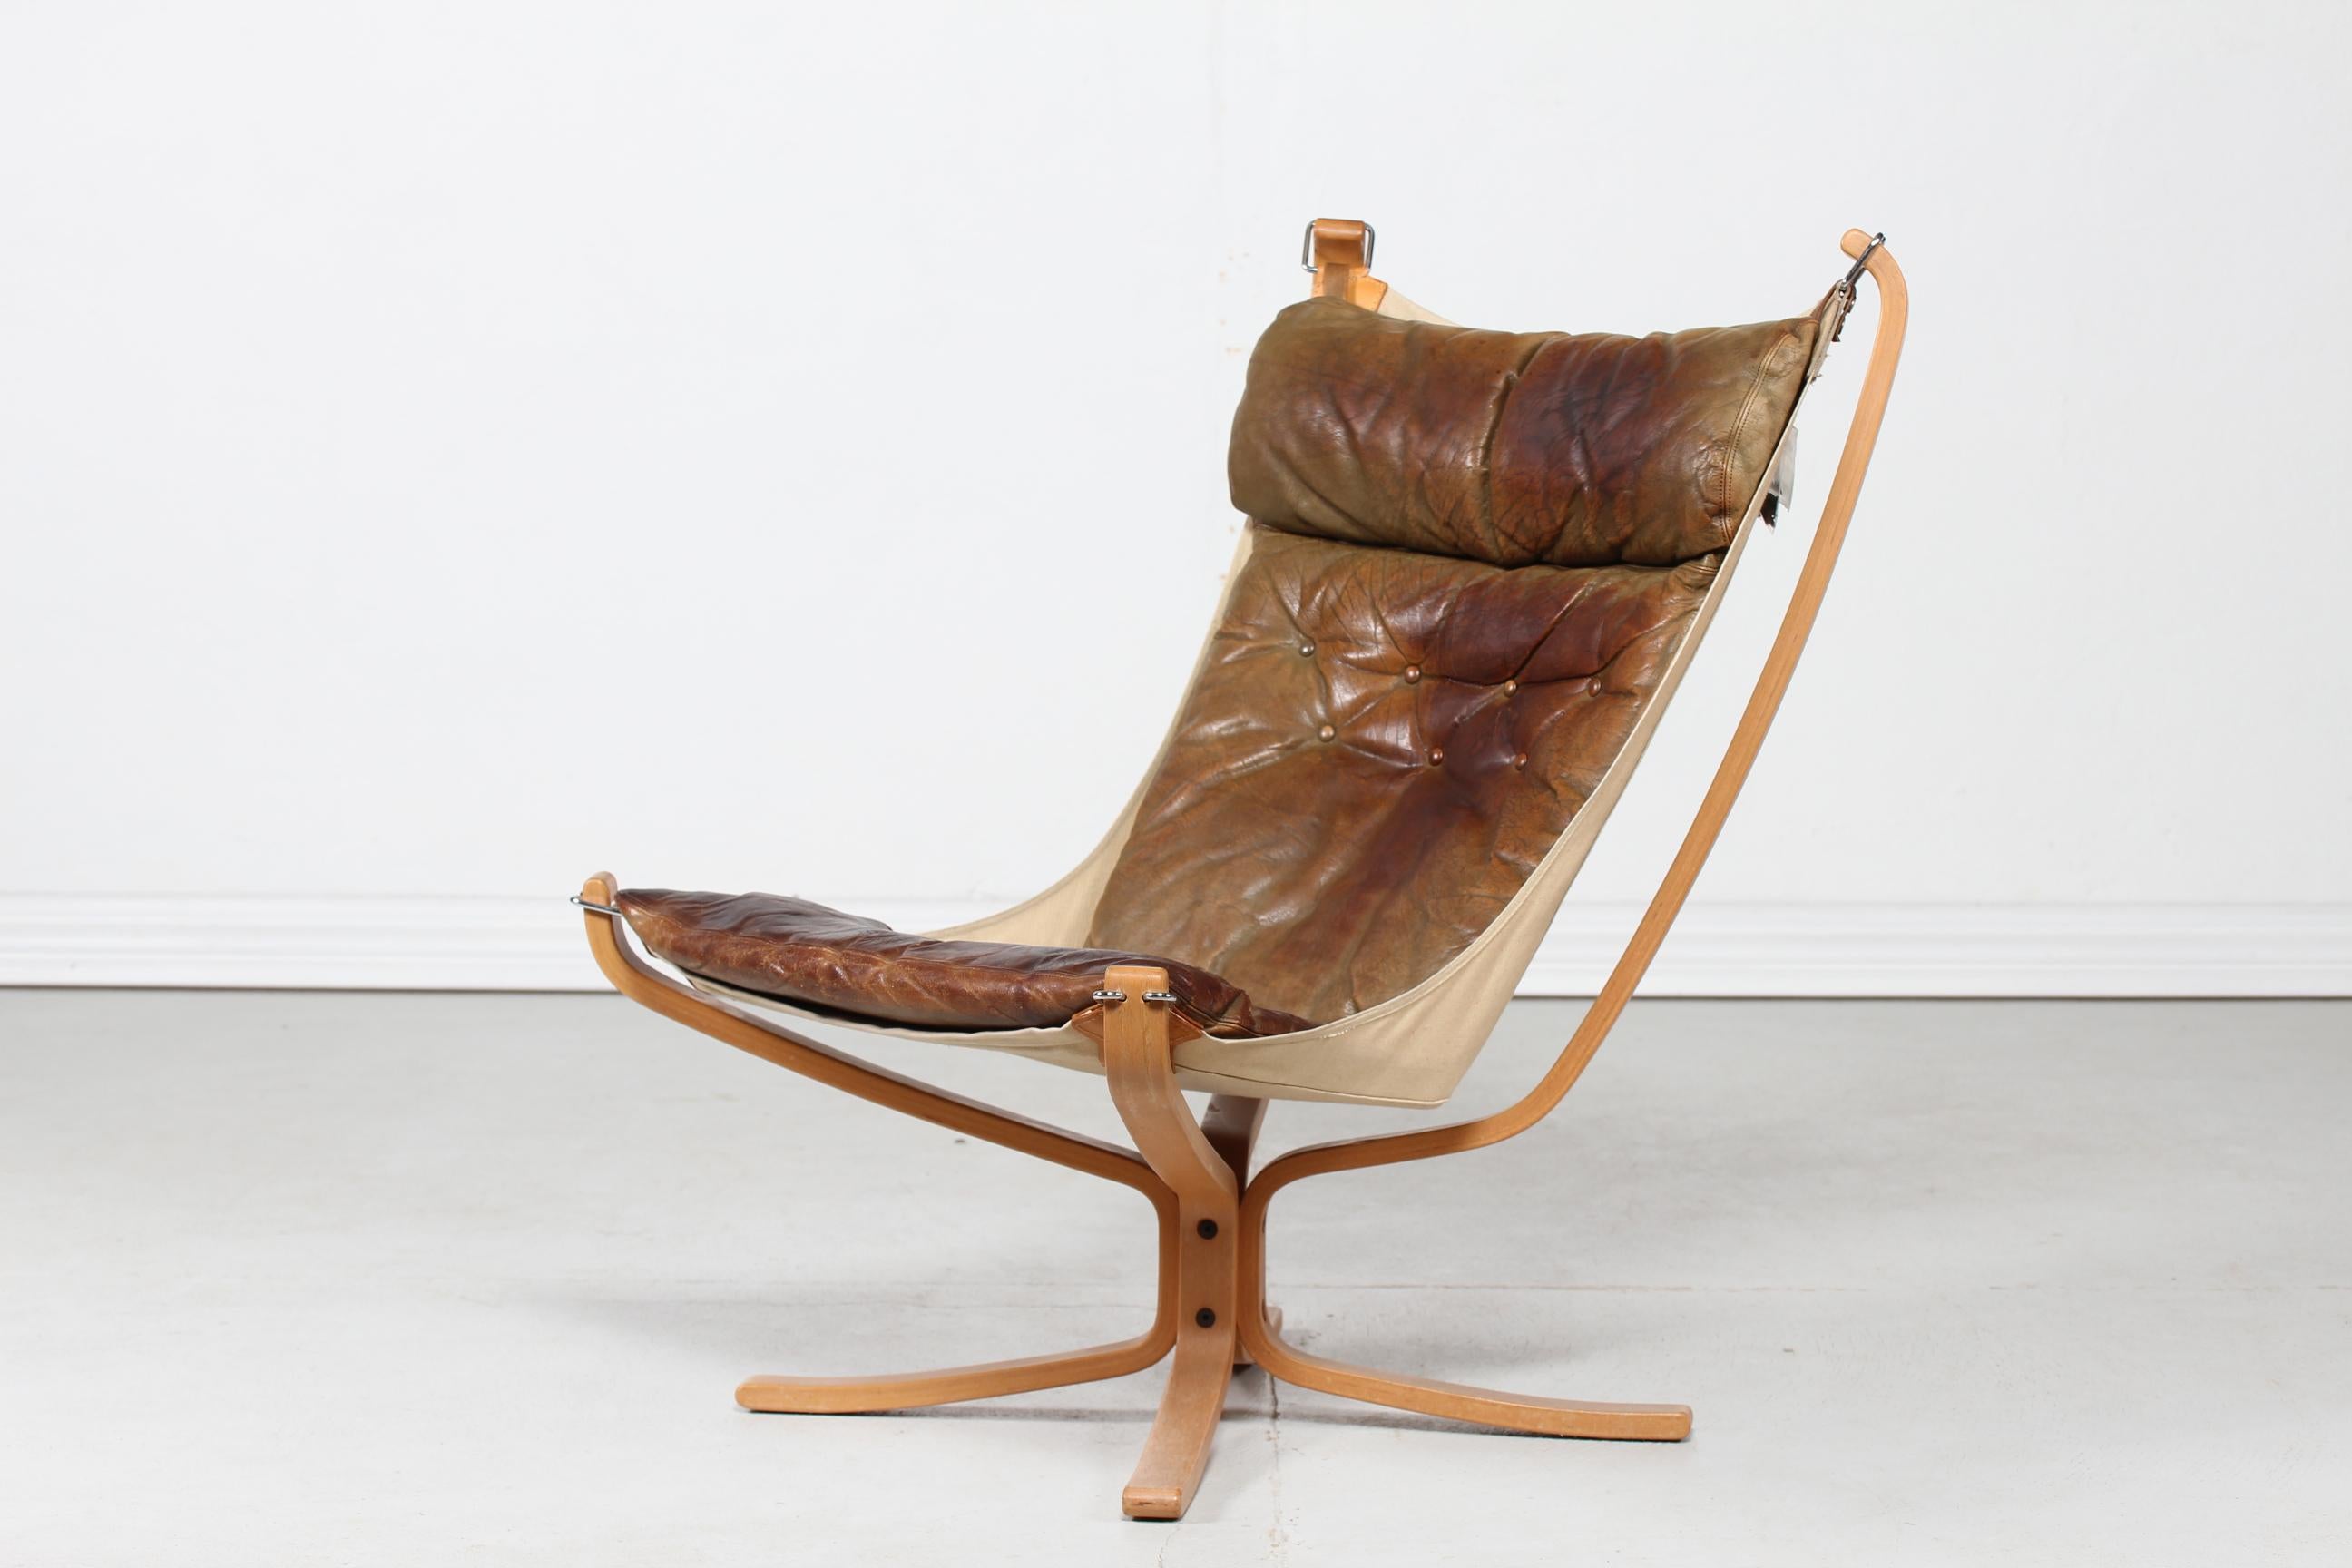 A Falcon easy chairs designed by Sigurd Ressell. Manufactured by Vatne Møbler Norway in 1970s
The chair has got a frame of steam bend beech wood with lacquer stretched with canvas. The cushions are upholstered with genuine brown leather.

Nice